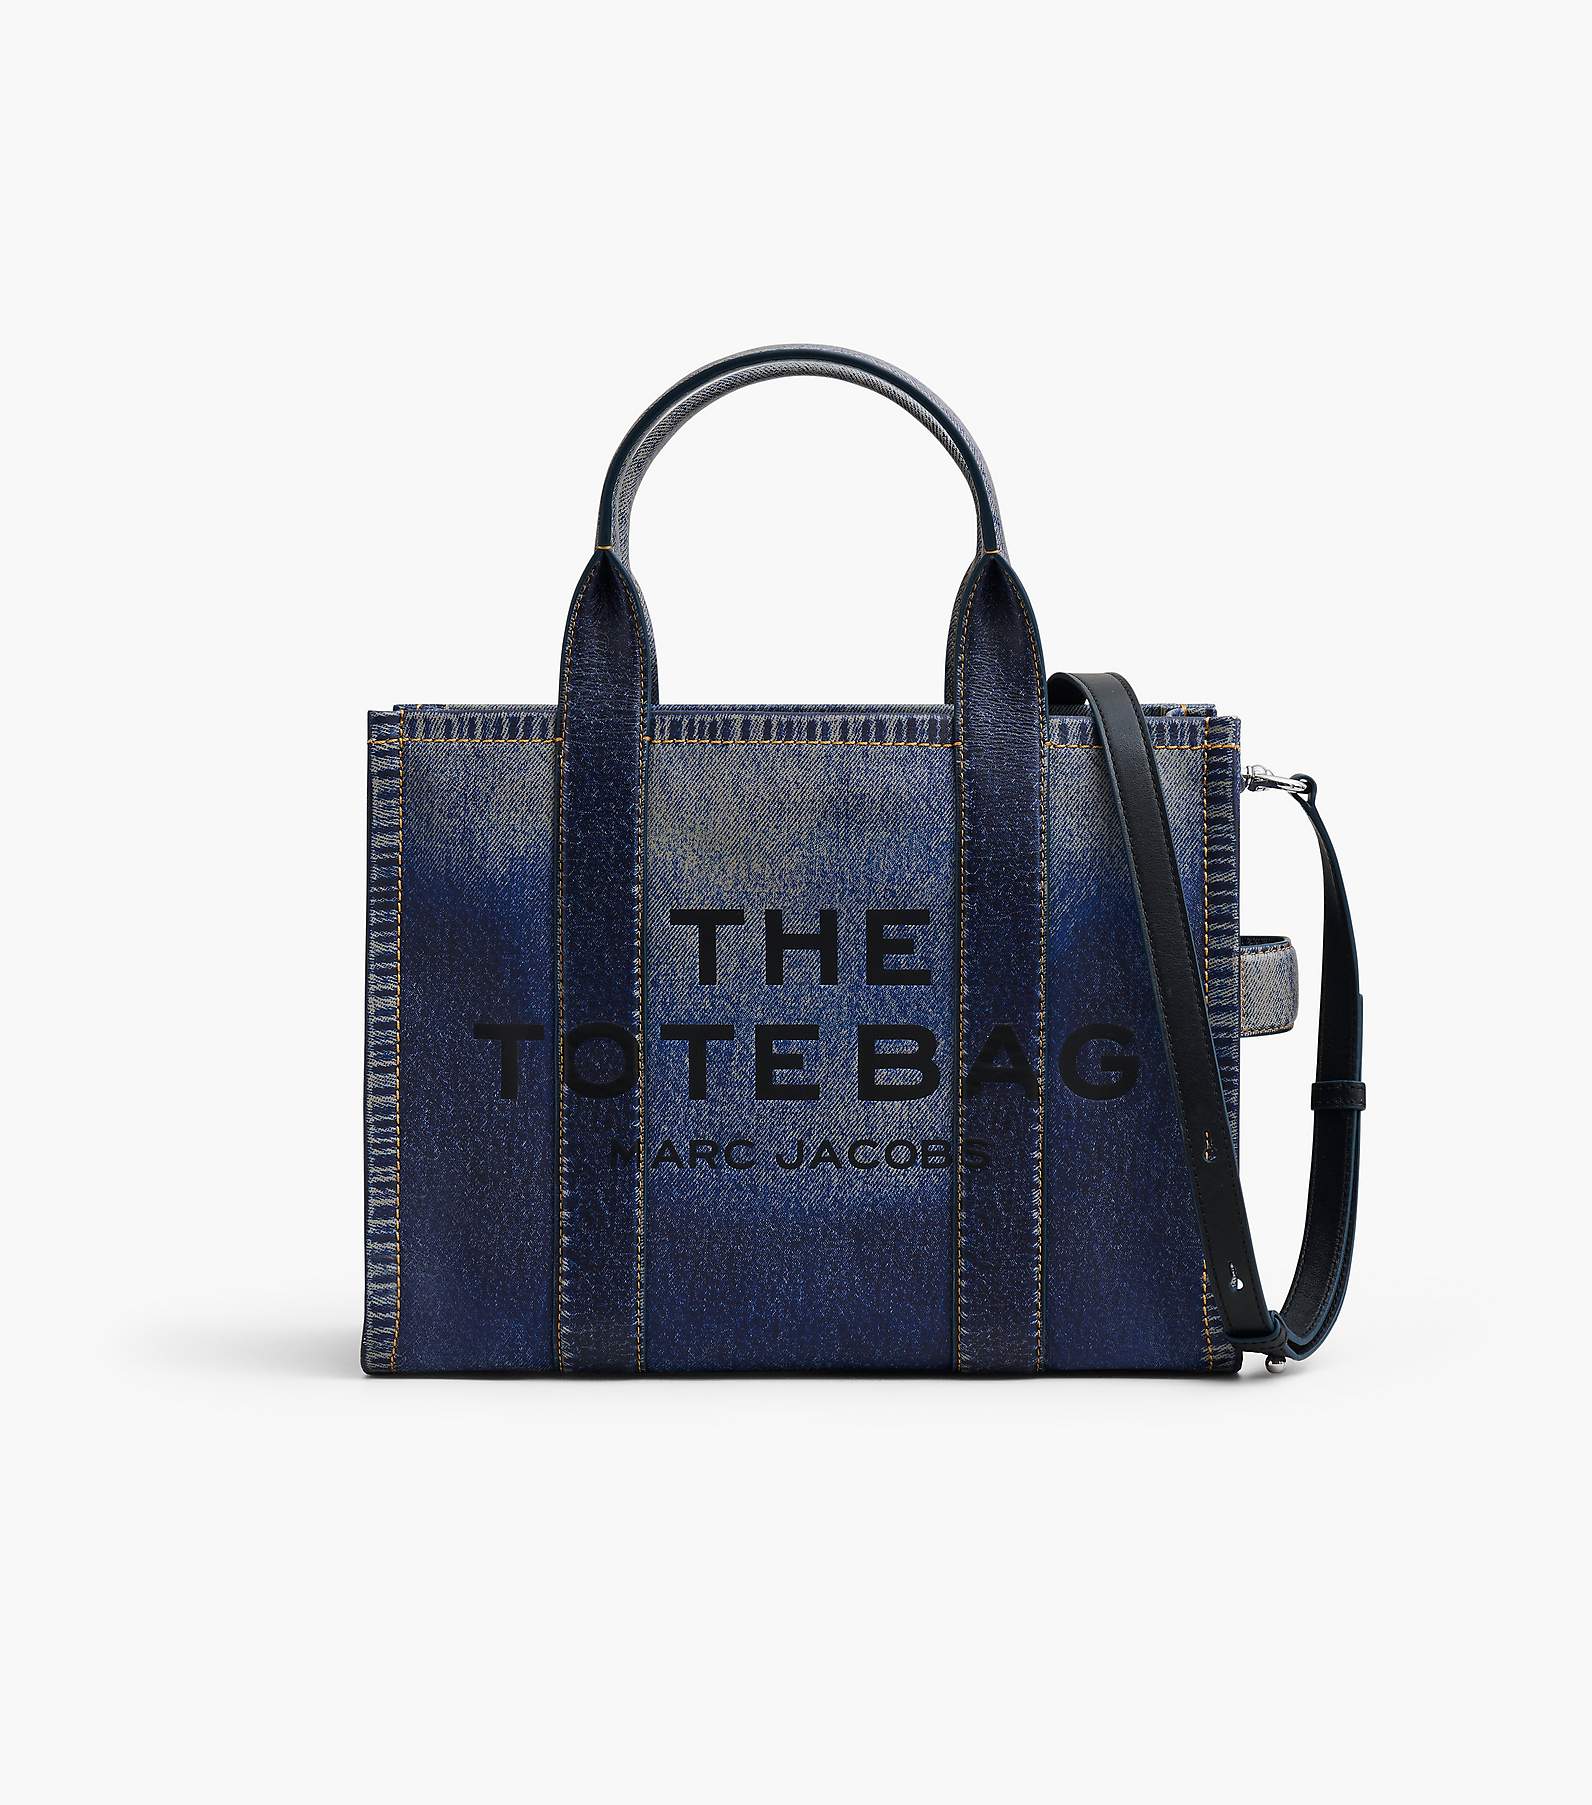 Marc Jacobs The Leather Small Tote Bag in Blue